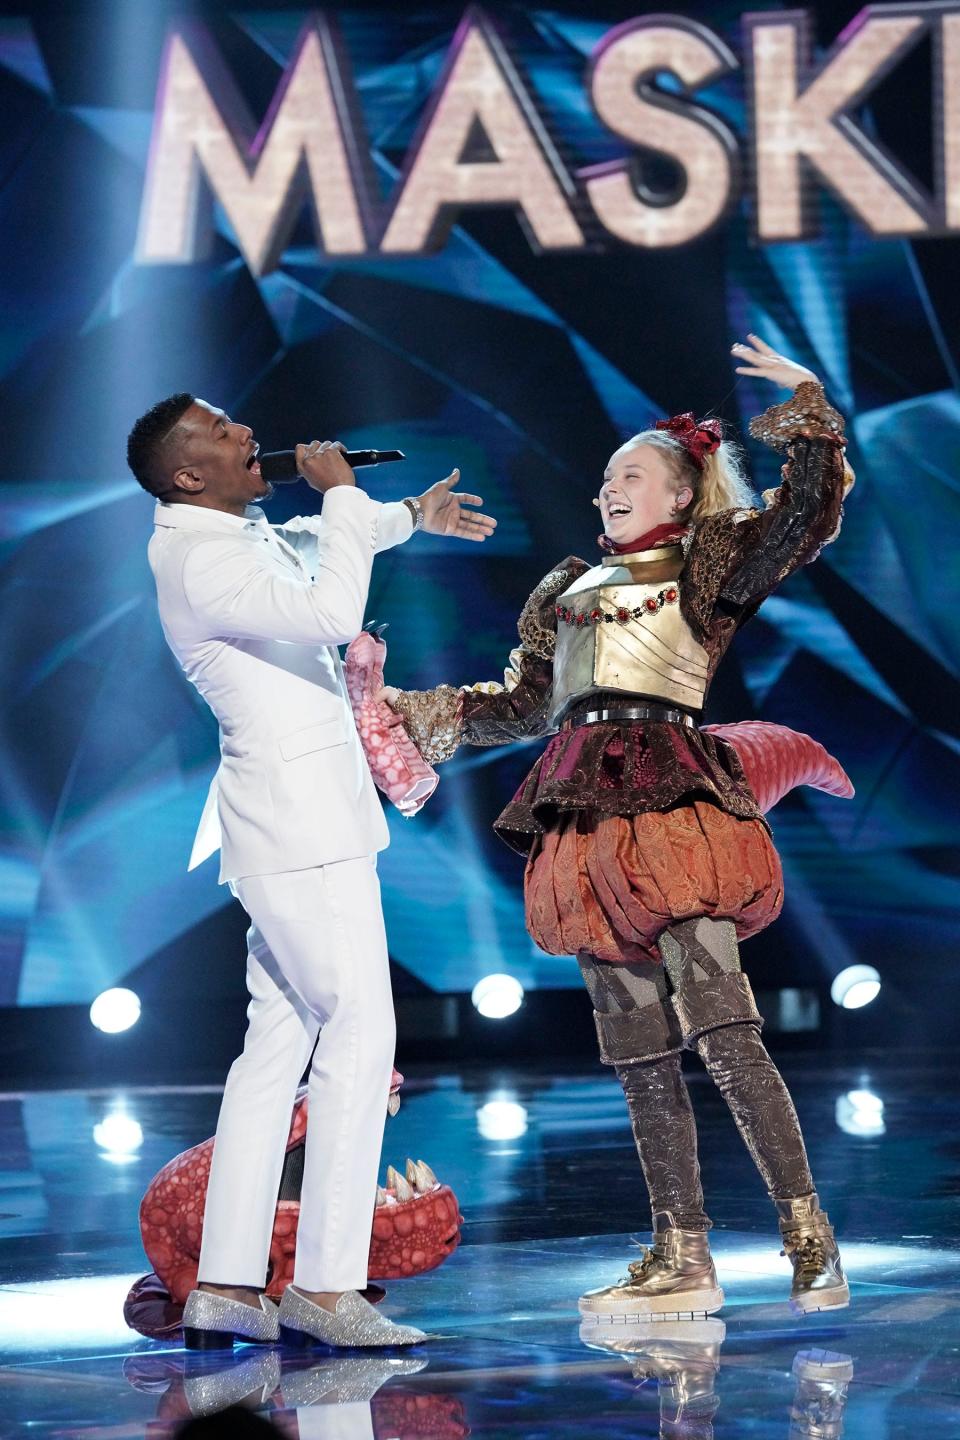 JoJo Siwa was revealed to be the T-Rex on season 3 of "The Masked Singer."